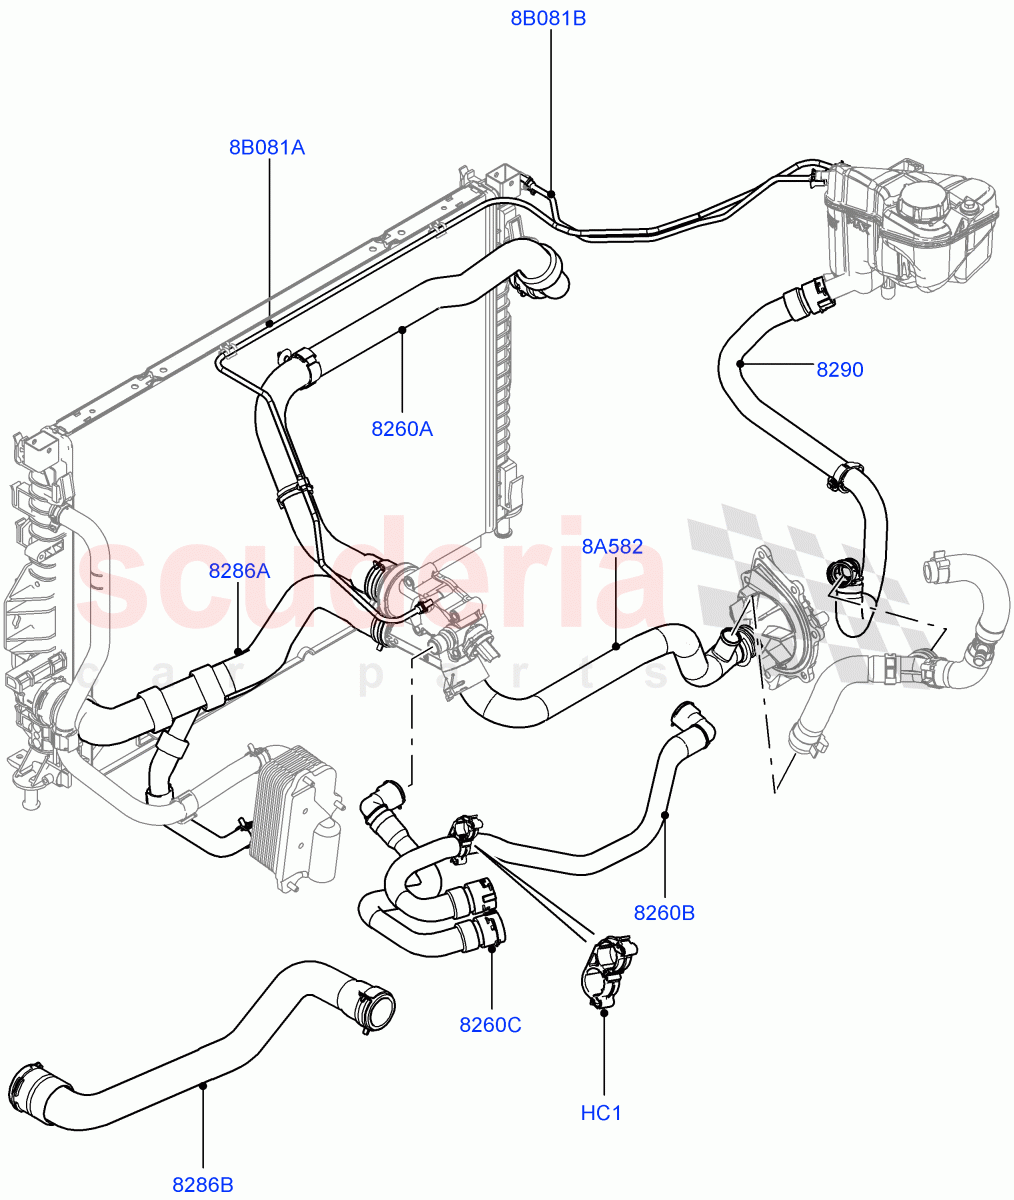 Cooling System Pipes And Hoses(2.2L CR DI 16V Diesel)((V)FROMEH000001) of Land Rover Land Rover Range Rover Evoque (2012-2018) [2.2 Single Turbo Diesel]